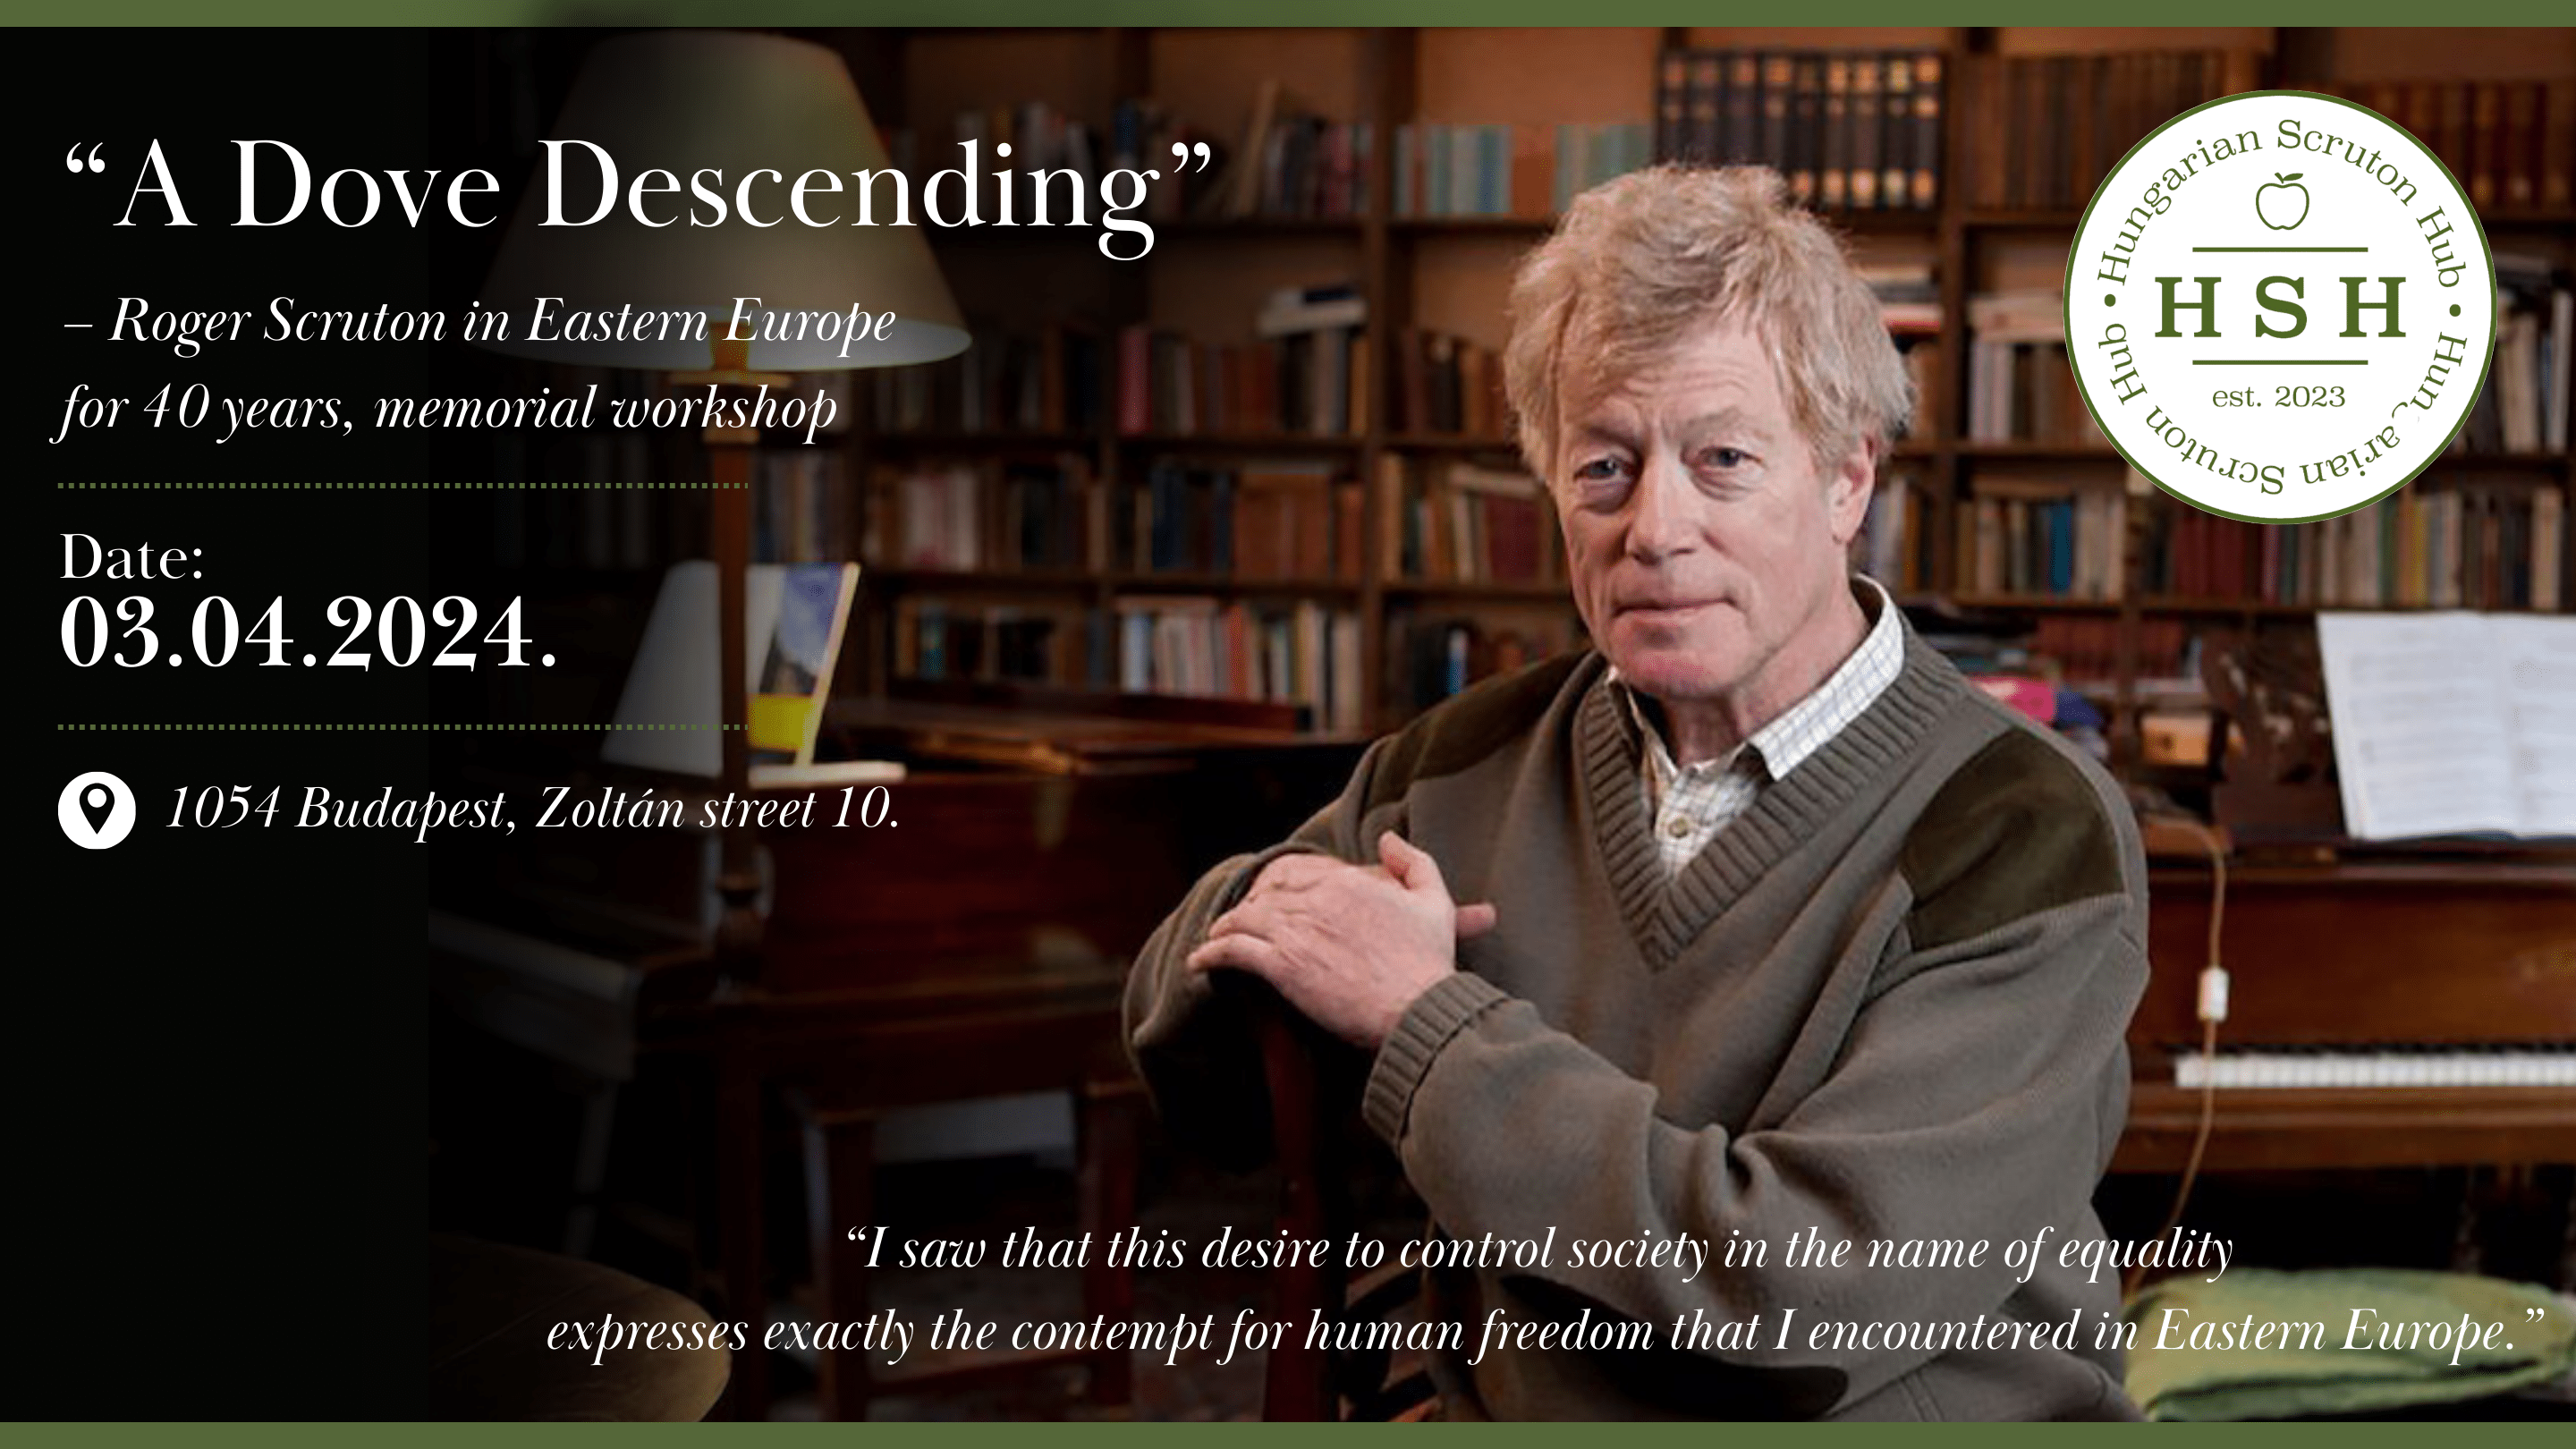 “A Dove Descending” – Roger Scruton in Eastern Europe for 40 years, memorial workshop